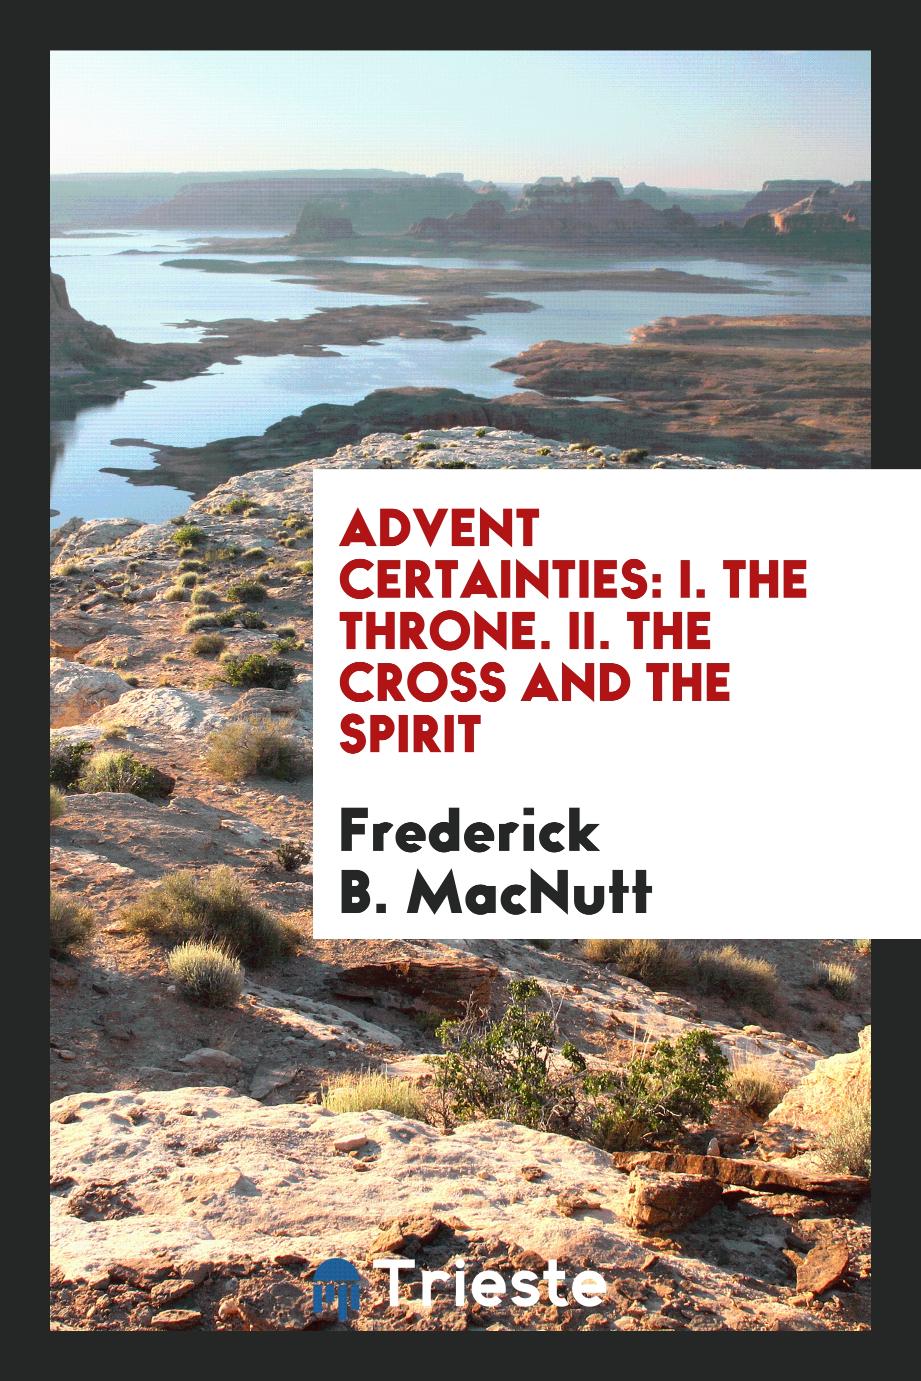 Advent certainties: I. The throne. II. The cross and the spirit